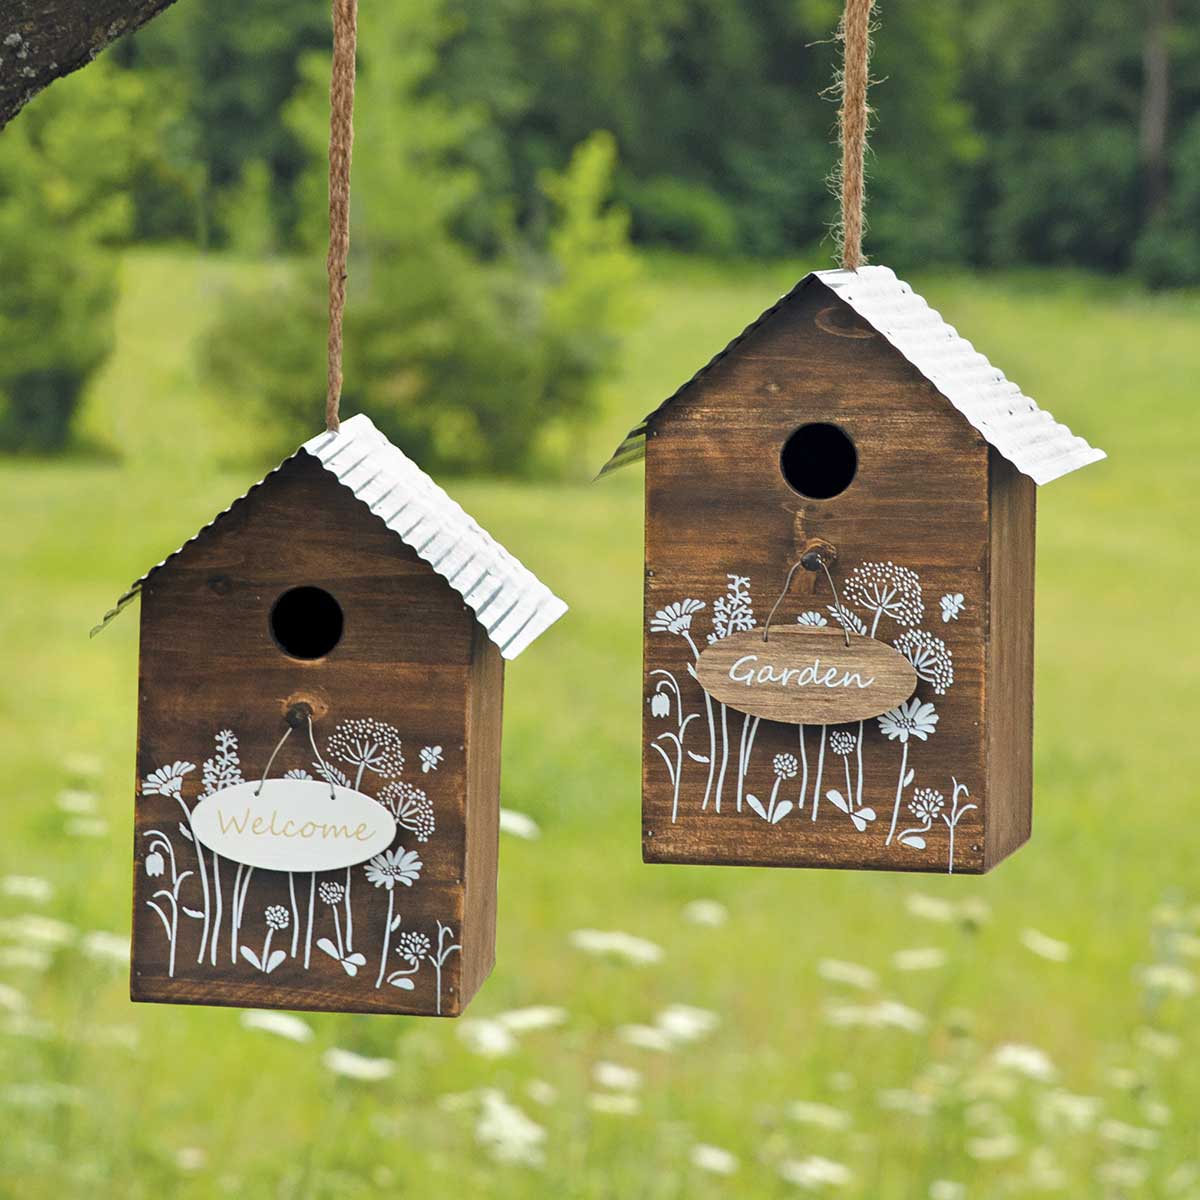 BIRD HOUSE 2 ASSORTED 7.5IN X 6.75IN X 9.5IN BR/WHITE WOOD/METAL